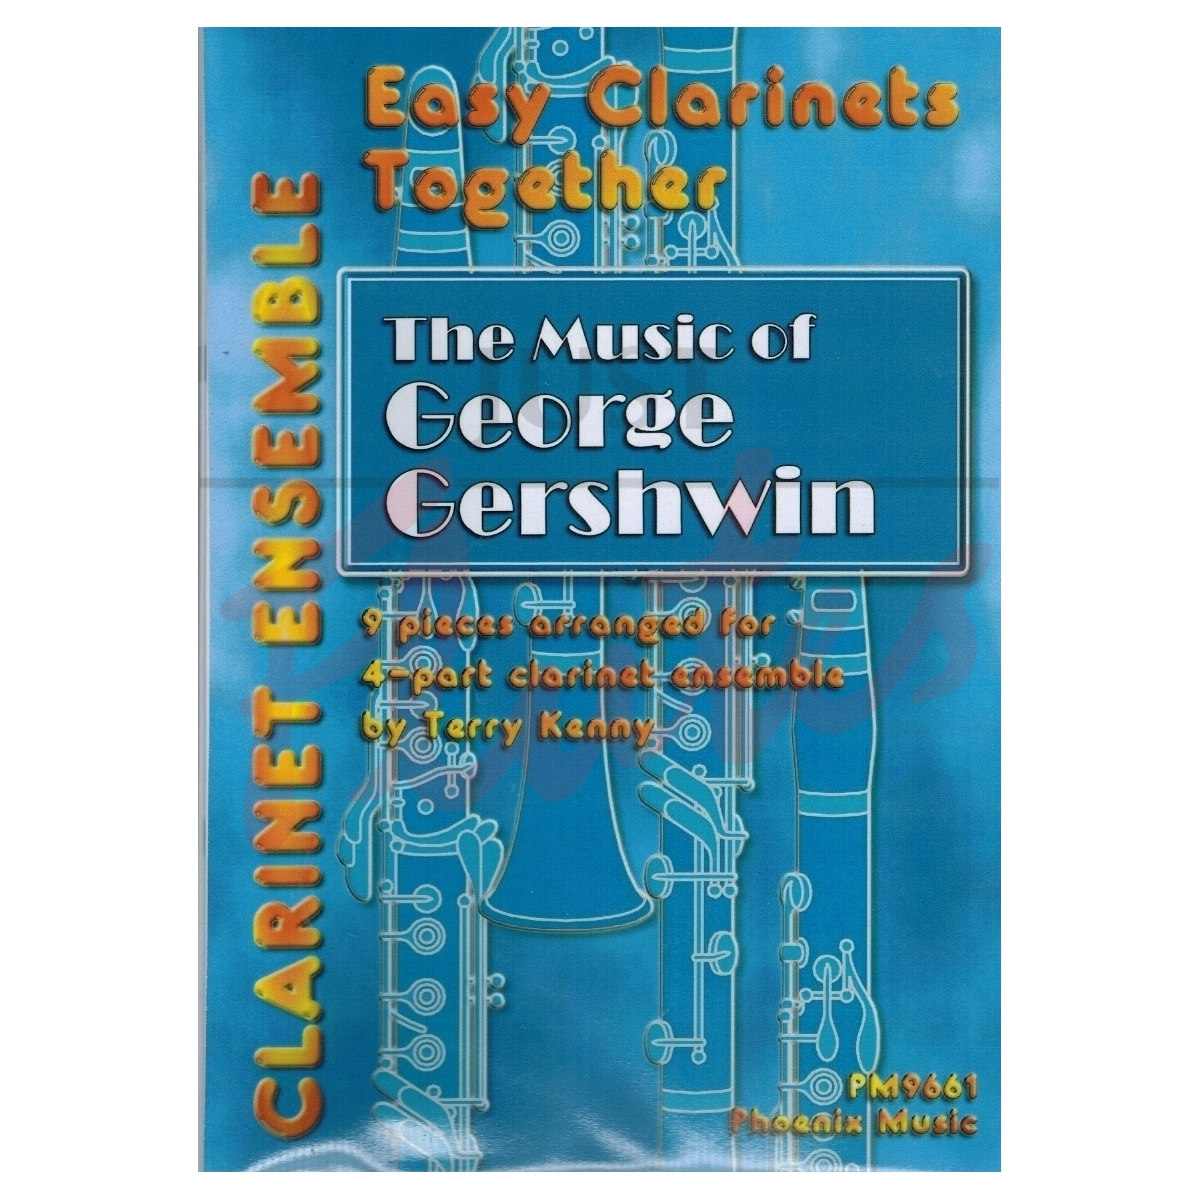 Easy Clarinets Together - The Music of George Gershwin